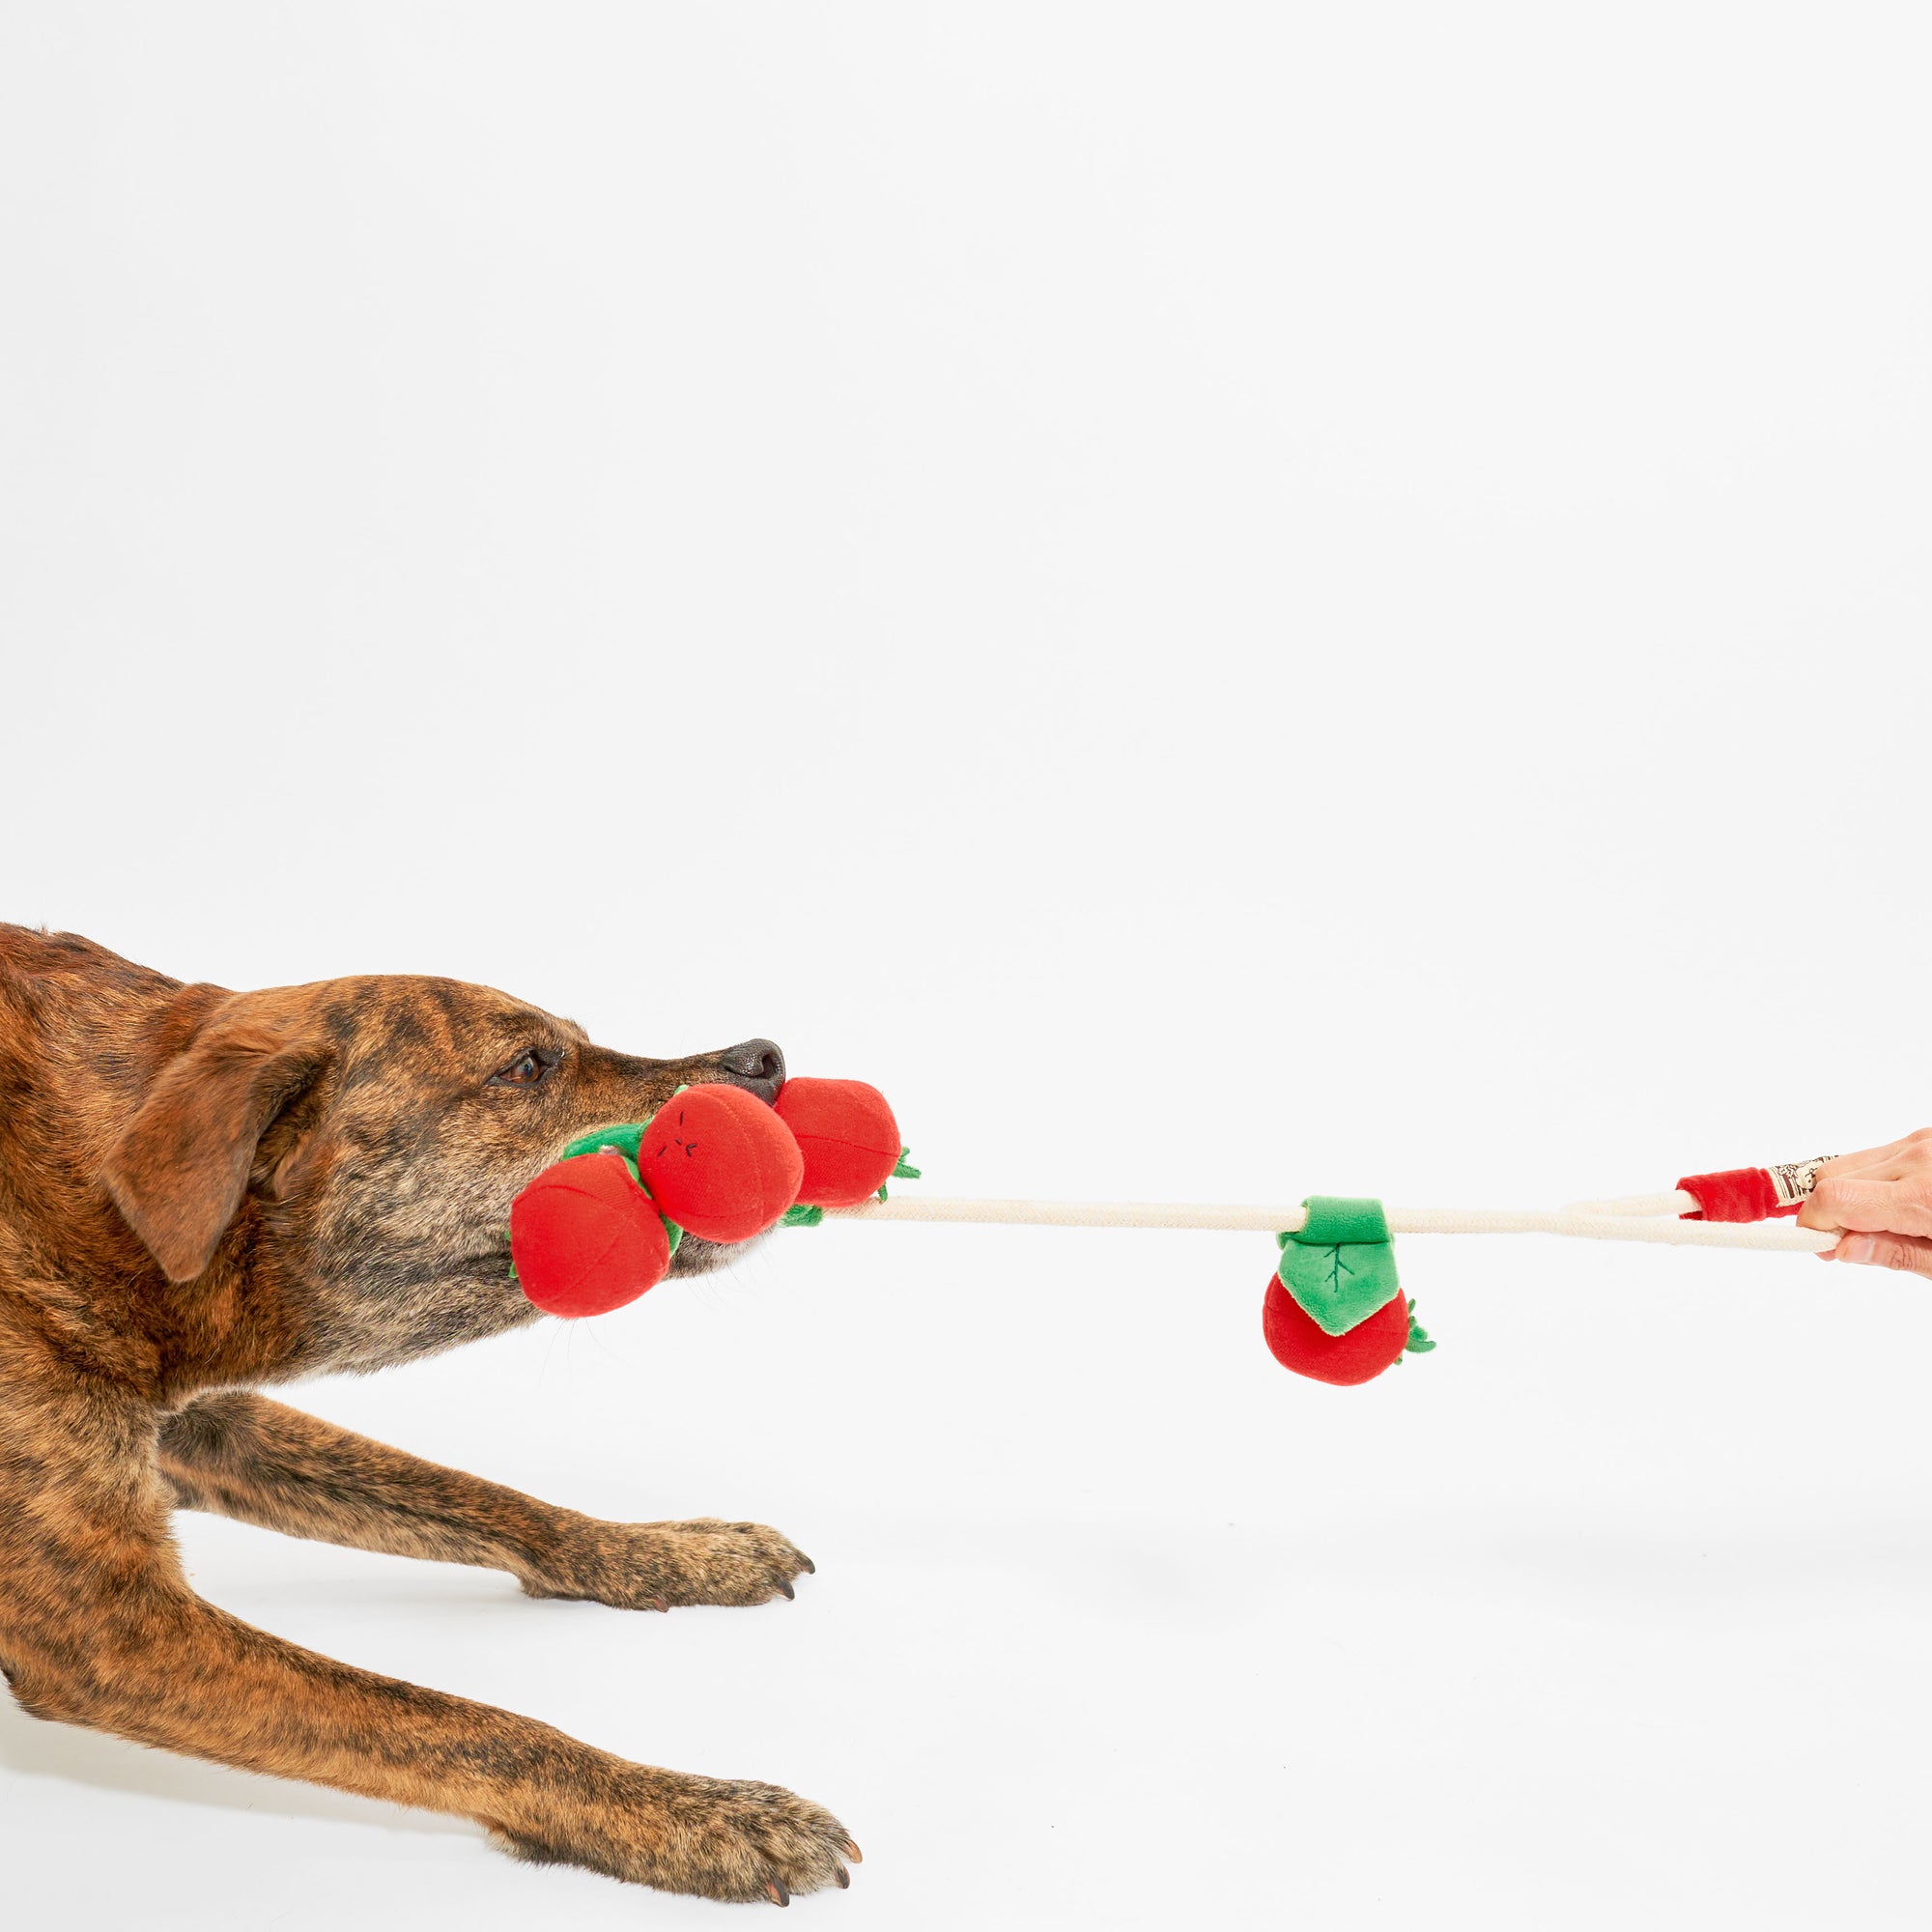  The image shows the brindle-coated dog playing tug-of-war with the plush tomato toy. A human hand is visible on the right, holding the toy, indicating an interactive play session between the dog and its owner. The dog seems to be gripping the toy with determination, a common and enjoyable game that many dogs love to engage in, as it mimics the natural behavior of grappling with prey. This kind of play can be a good exercise and a bonding activity for the pet and owner.